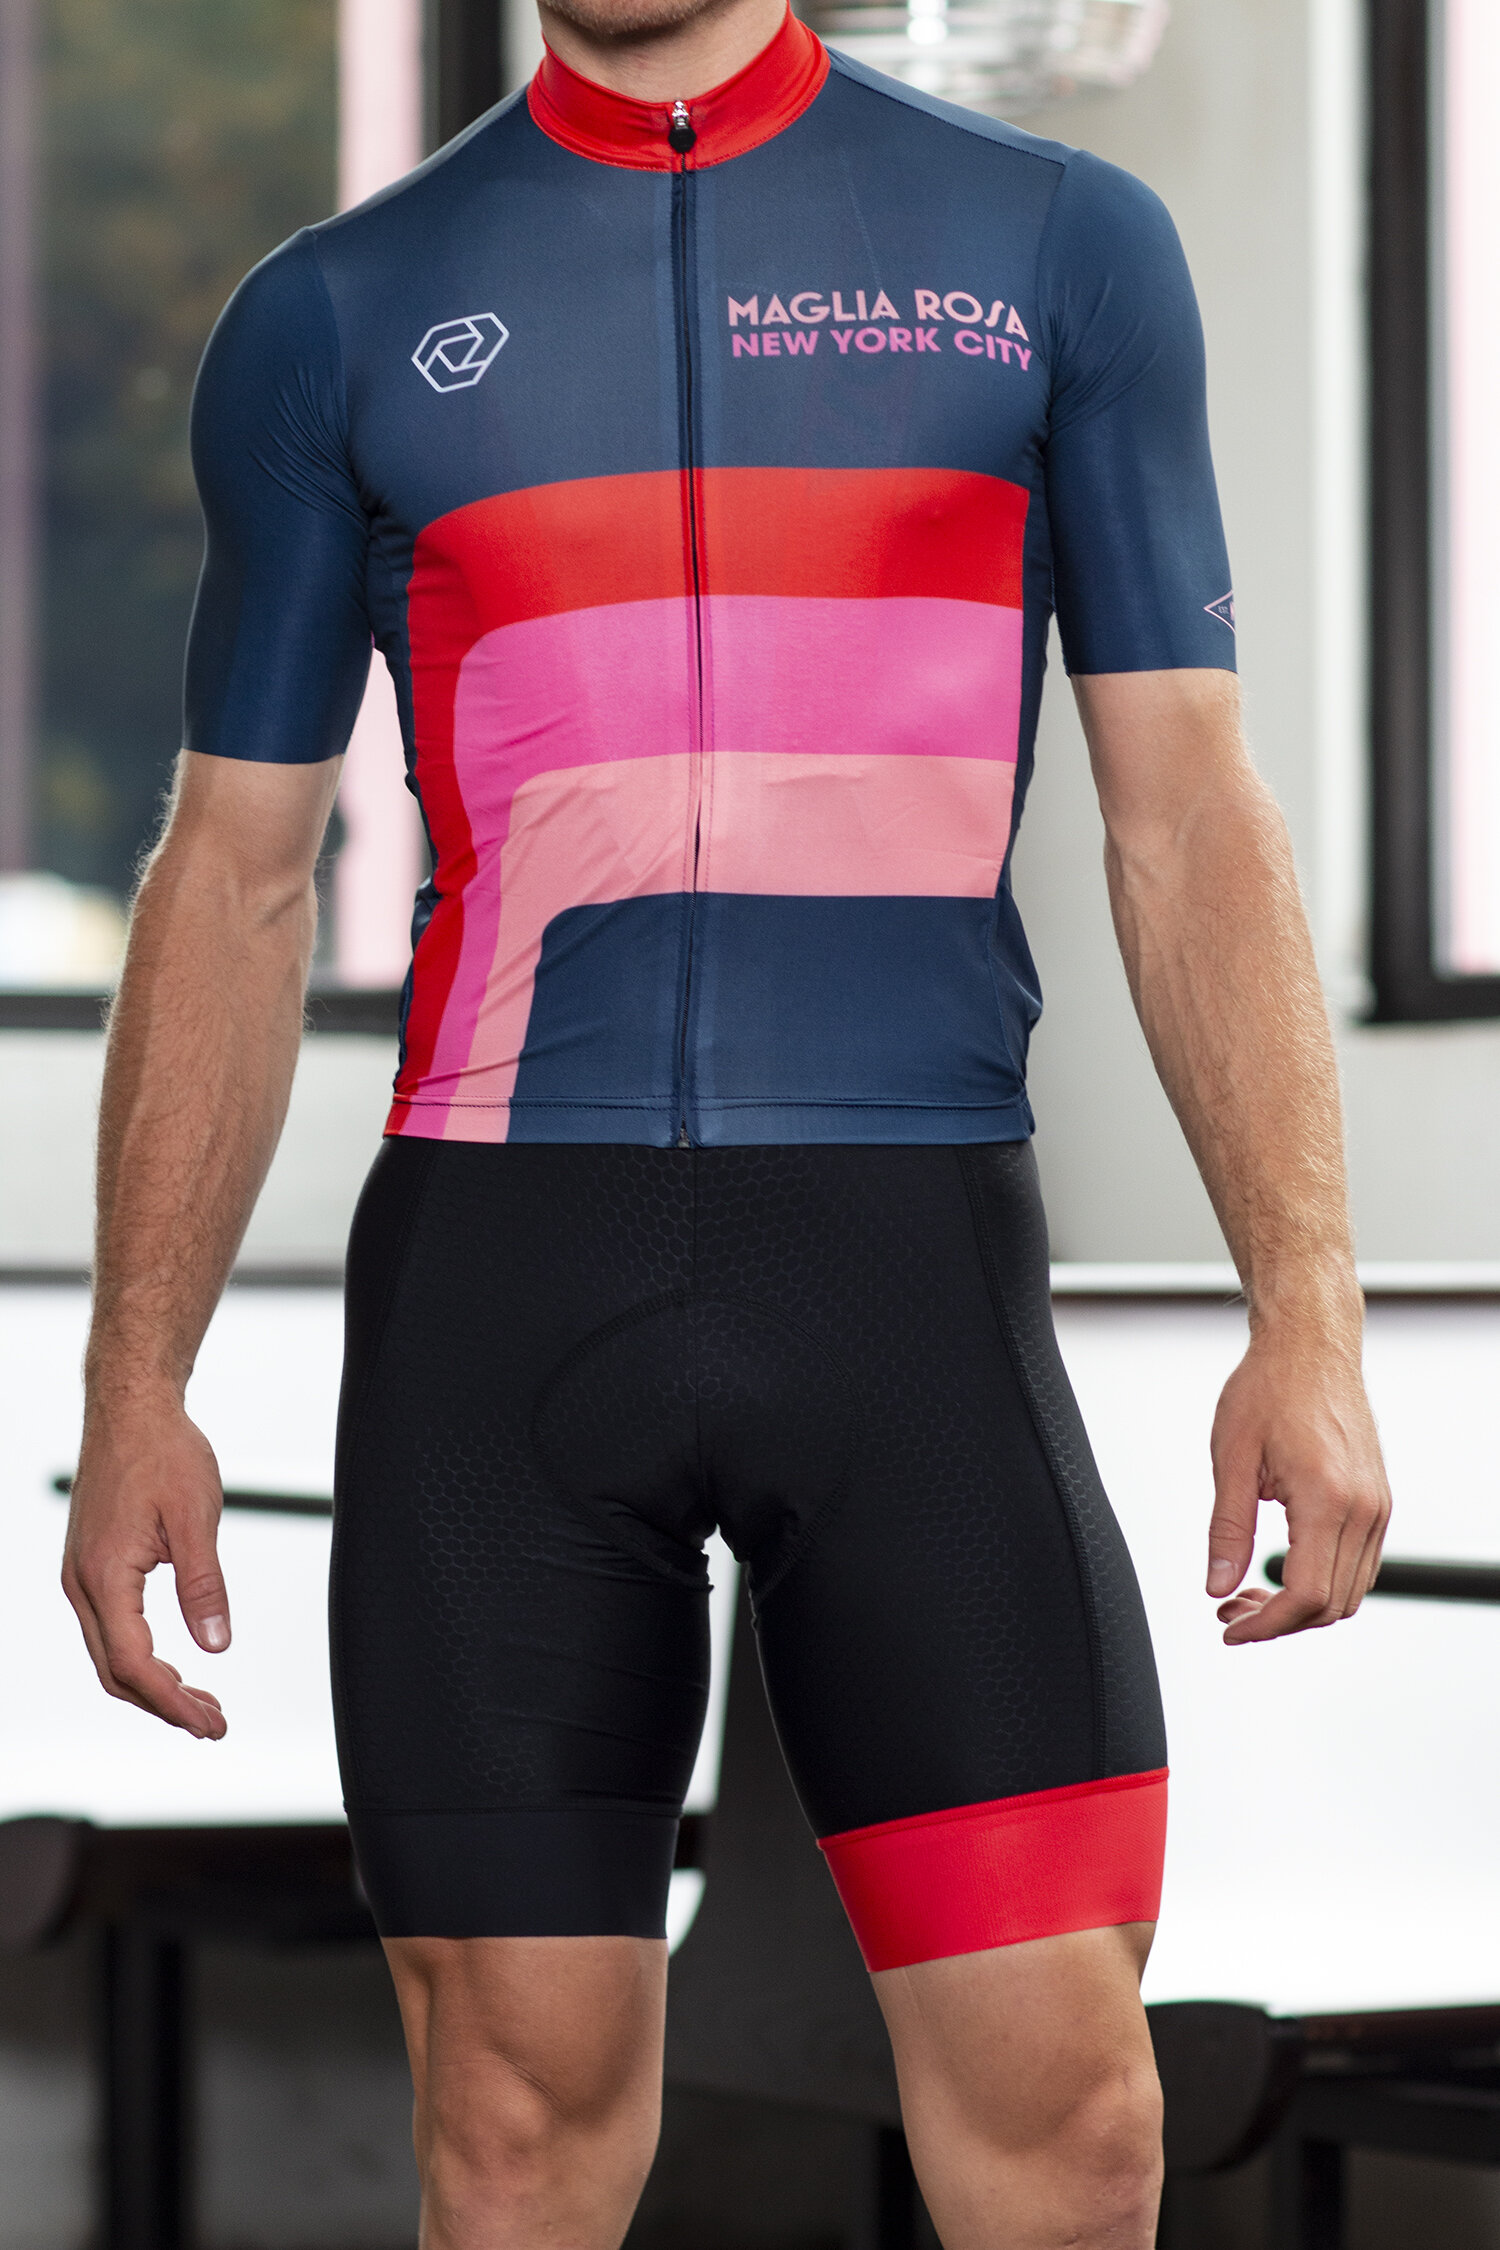 Rosa NYC Short Jersey - Navy/Red/Pink Edition — Maglia Rosa